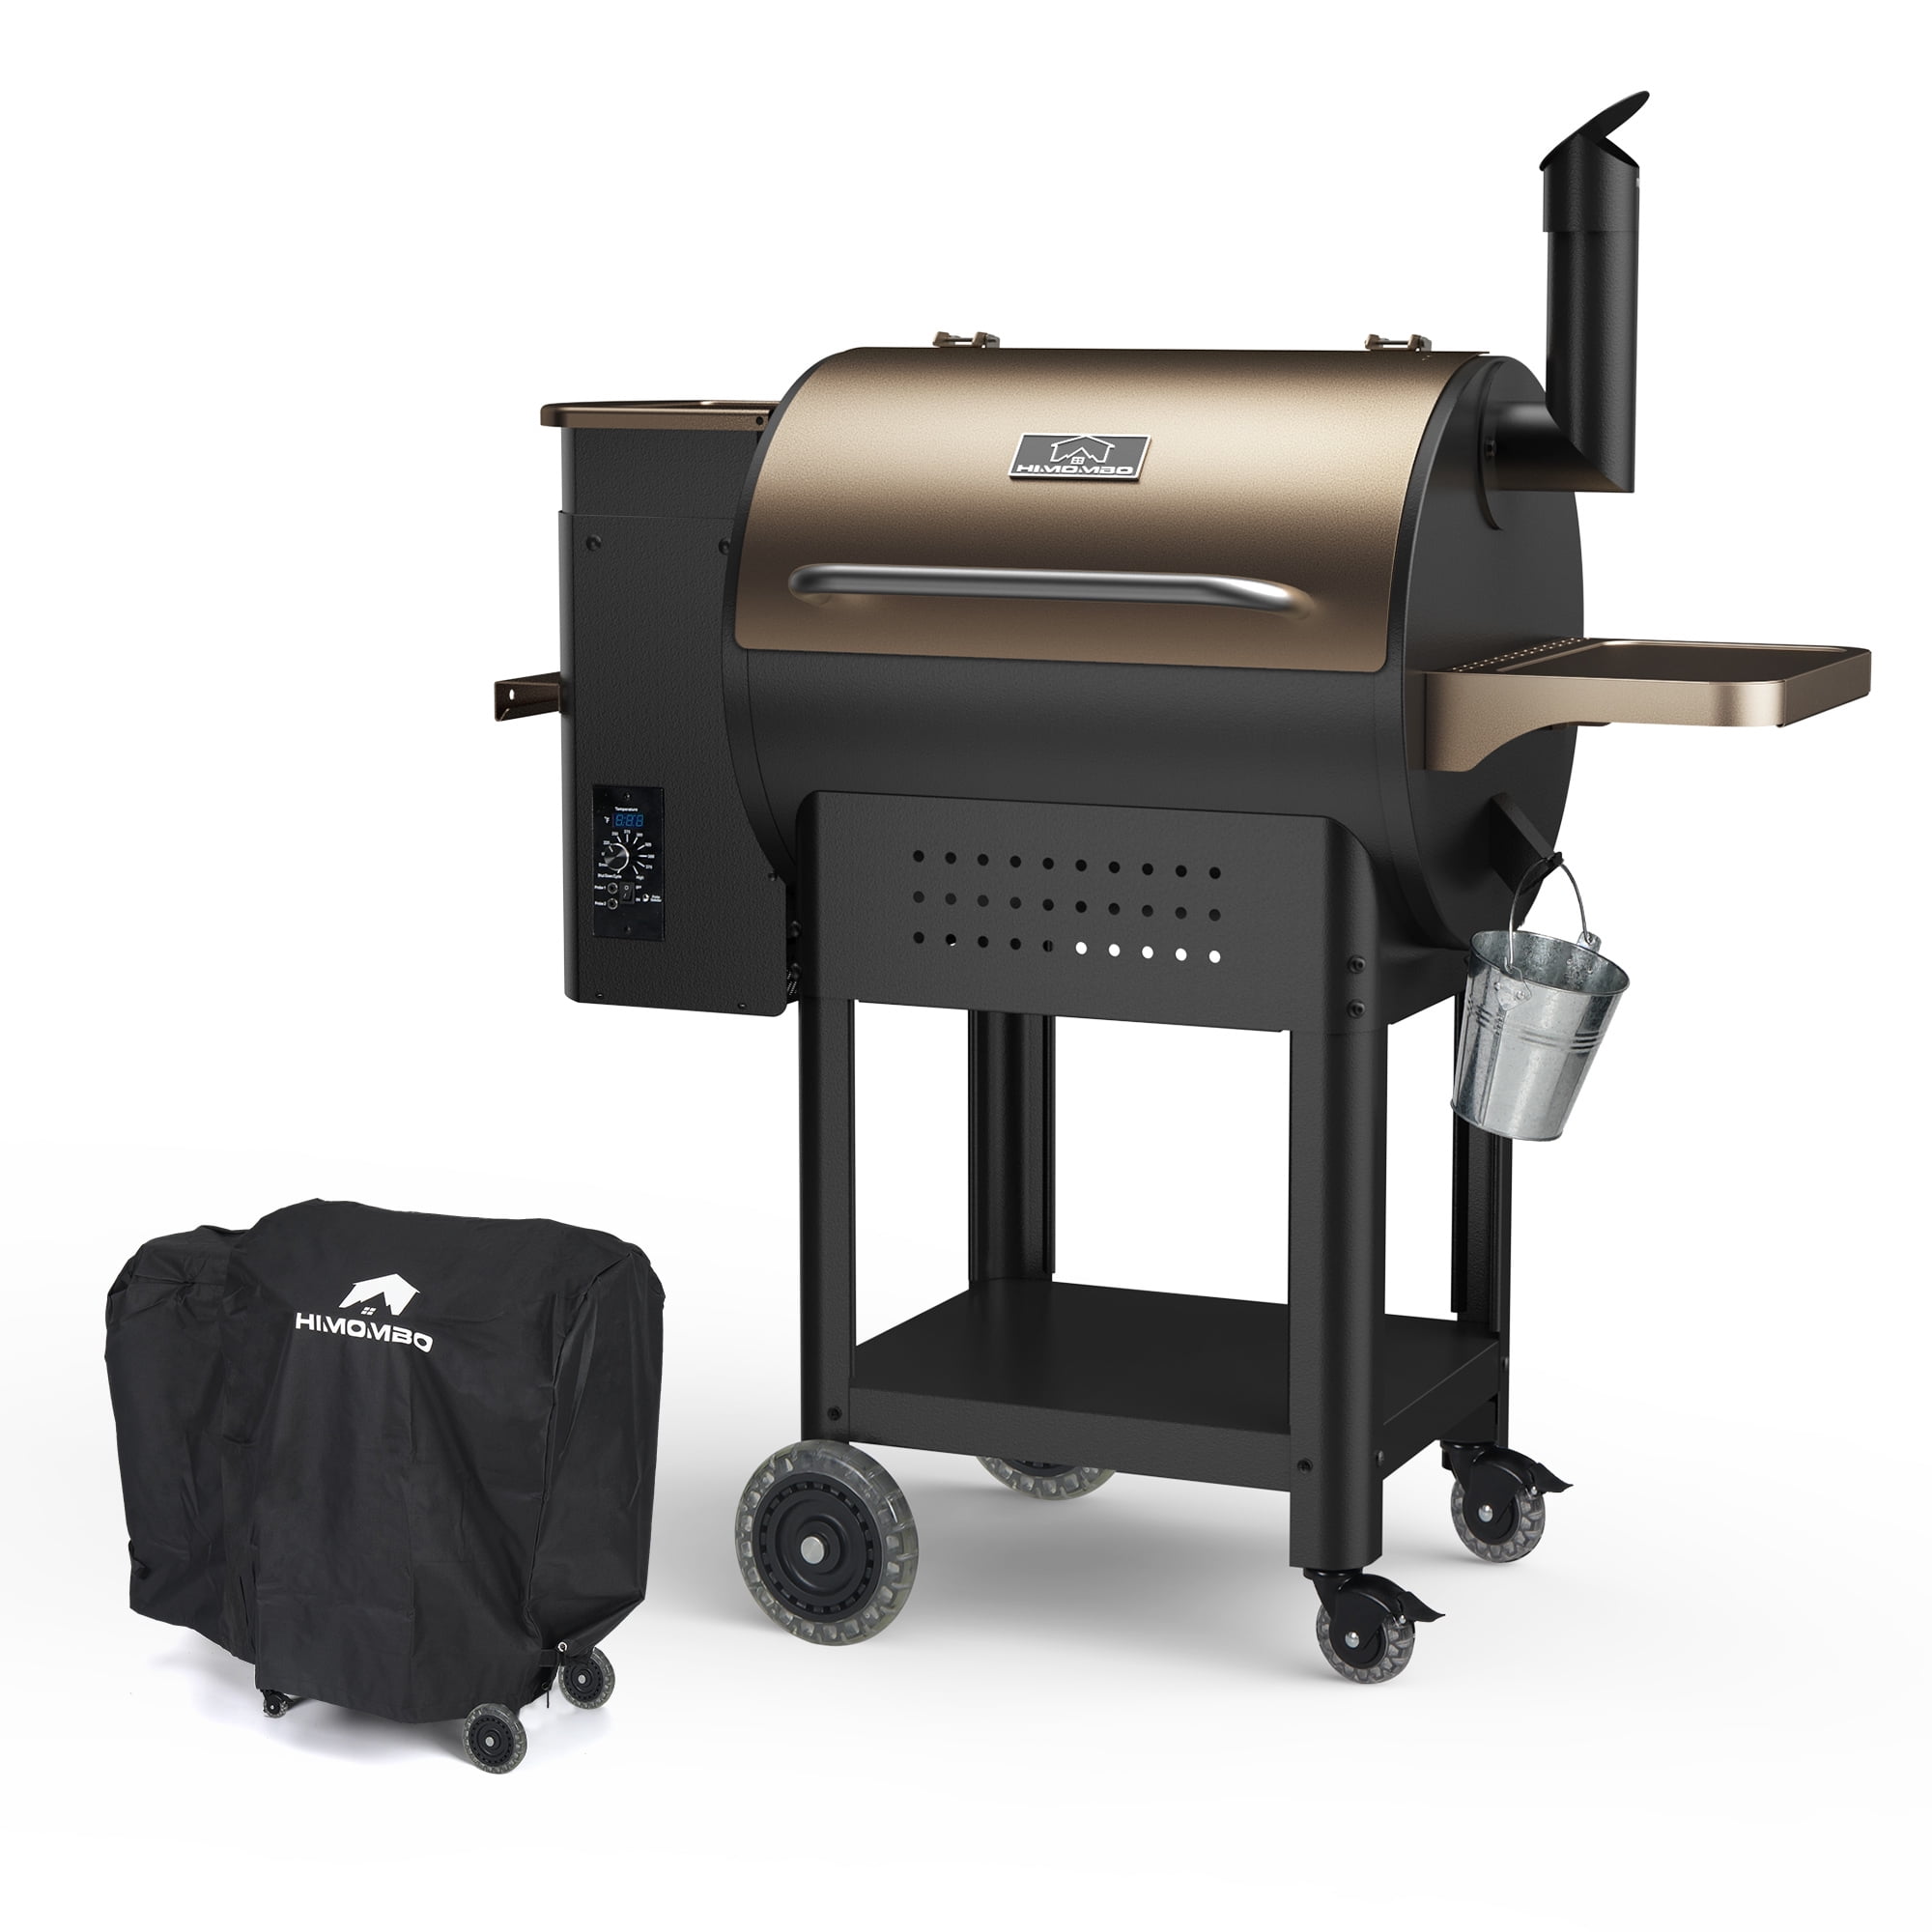 KingChii Wood Pellet Grill & Smoker 456sq.in., 8-in-1 Multifunctional BBQ  Grill with Automatic temperature control for Outdoor Cooking, Foldable Legs  